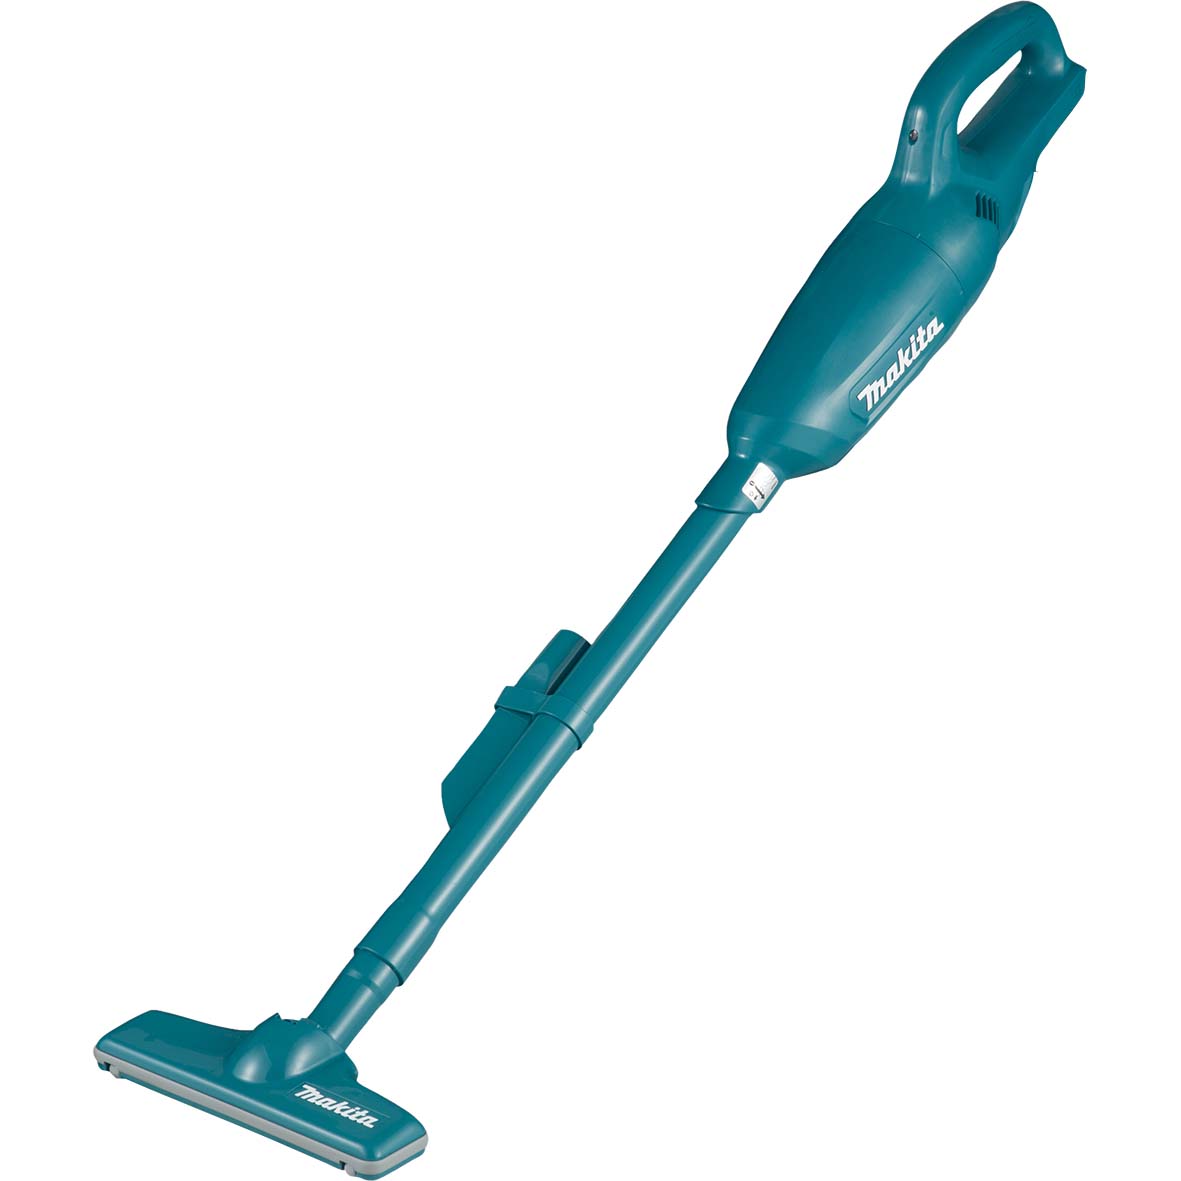 12V Mobile Stick Vacuum Cleaner Bare (Tool Only) CL106FDZ by Makita